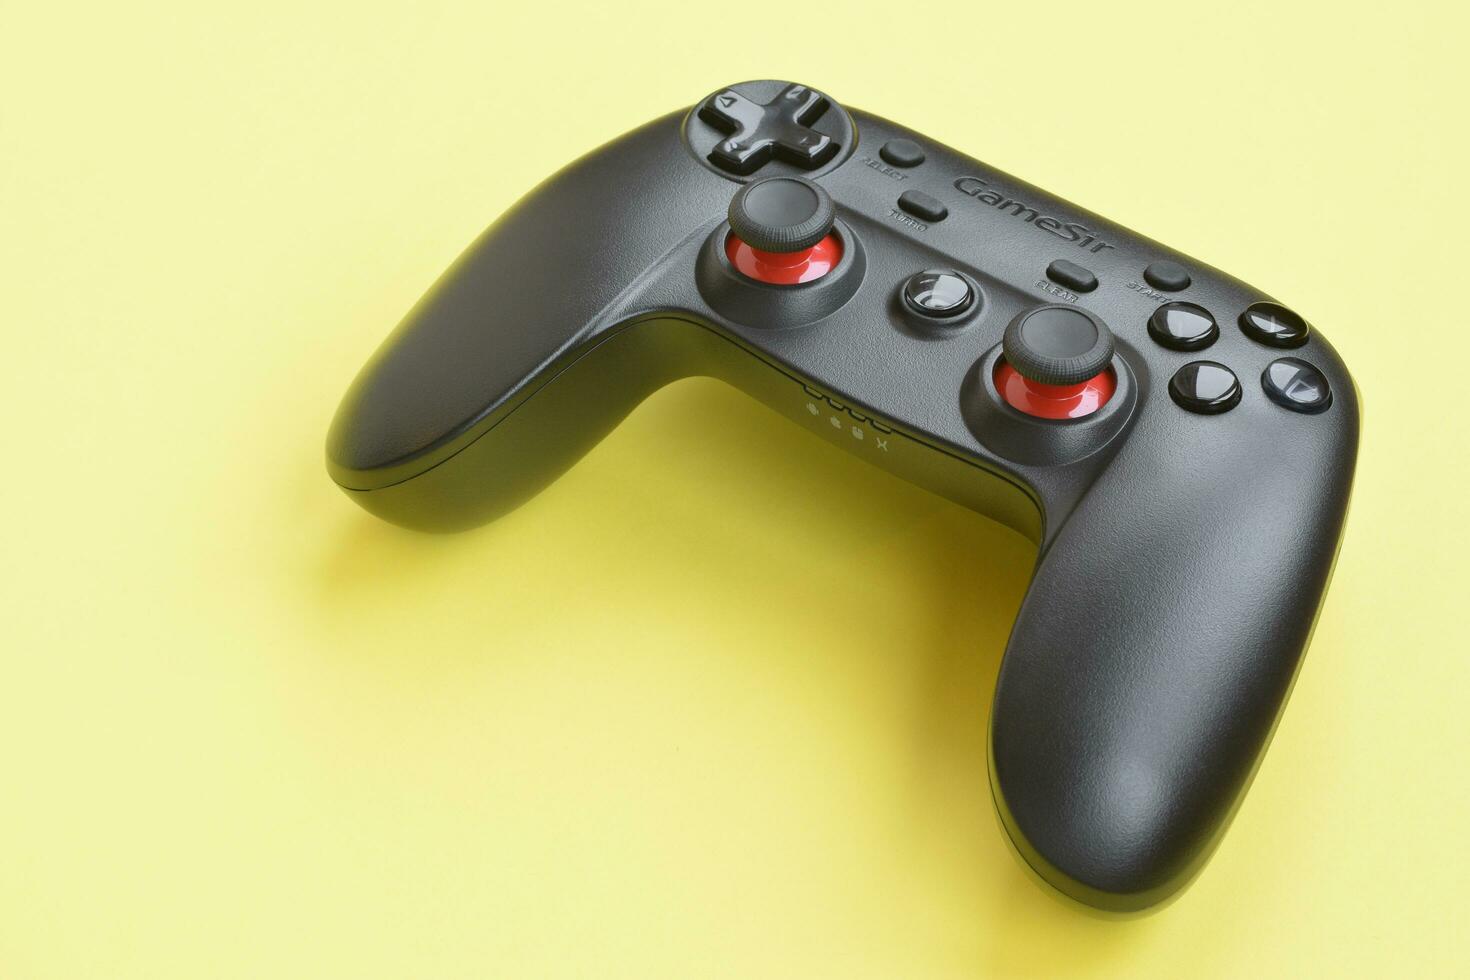 Gamesir g3s video game controller on yellow background photo